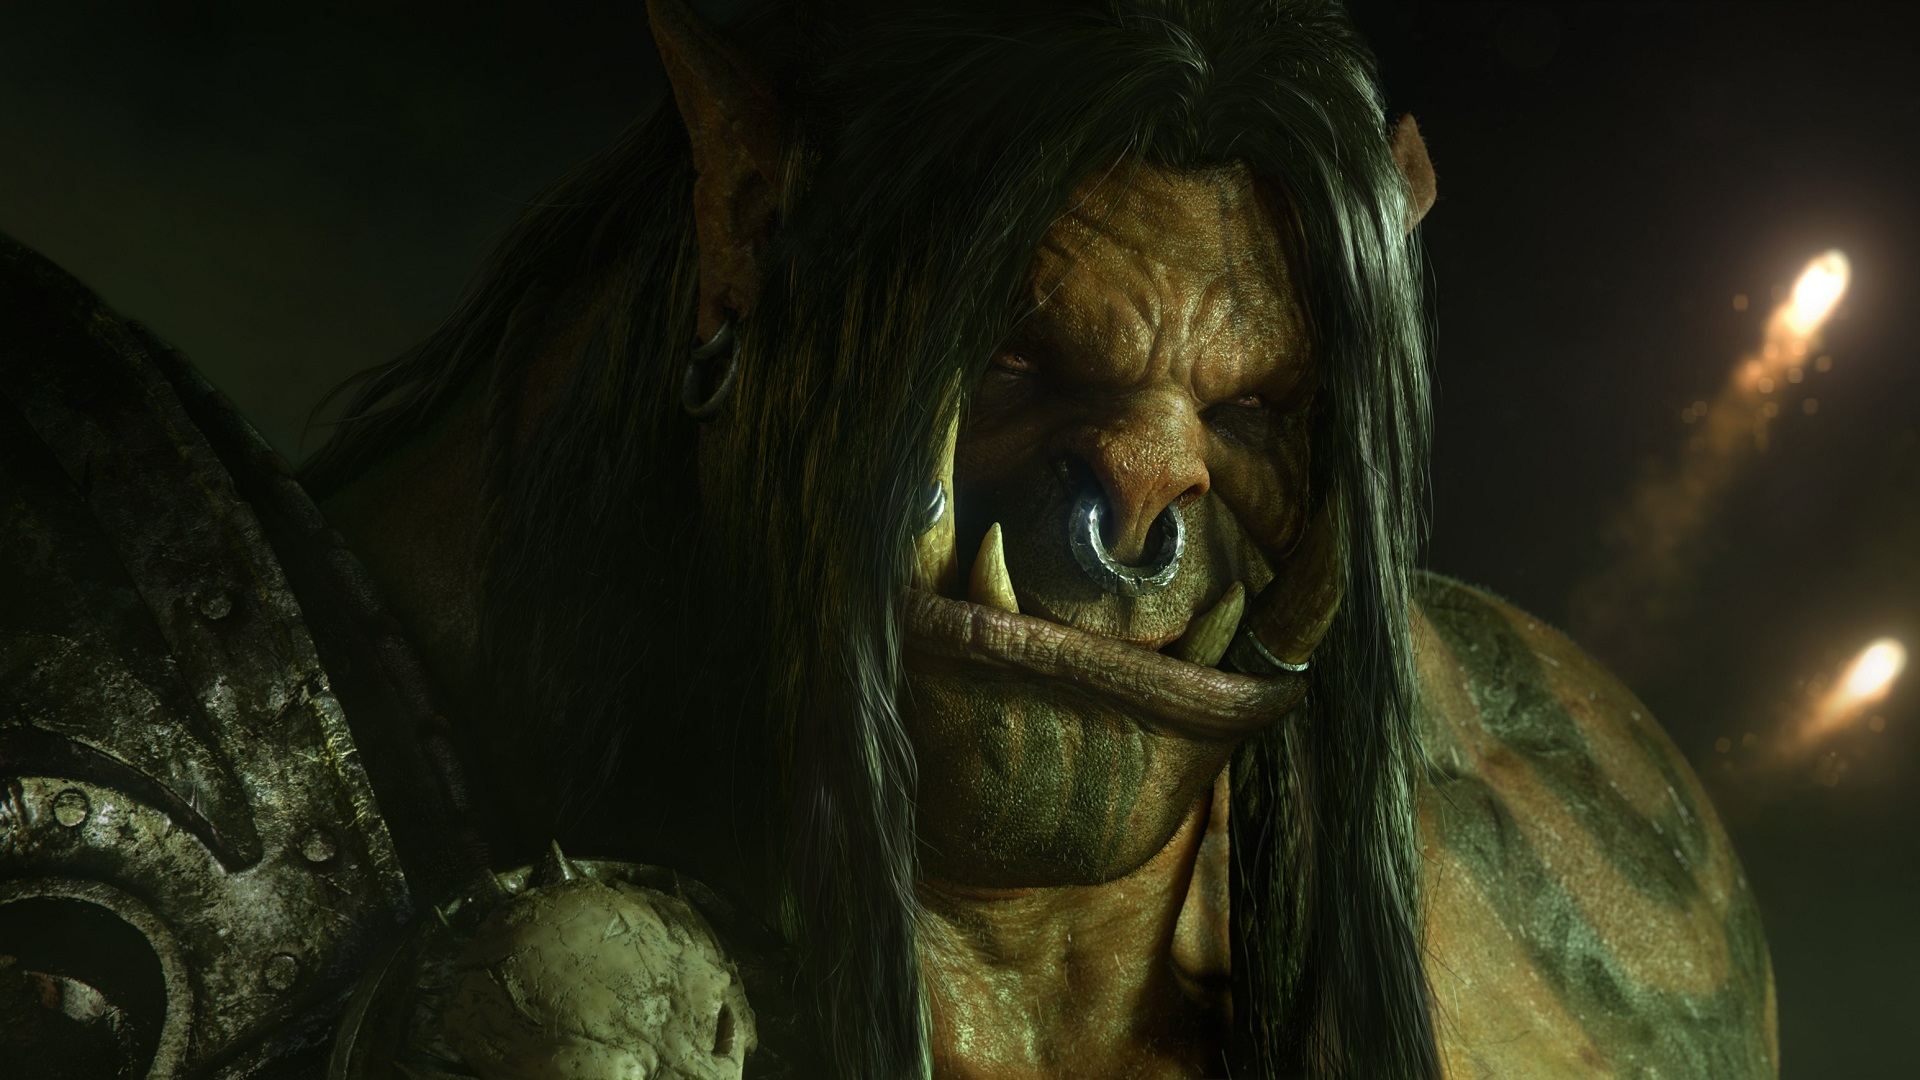 orcs, Long hair, Video games, Warcraft, World of Warcraft, Orc, Grommash hellscream, Nose rings Wallpaper